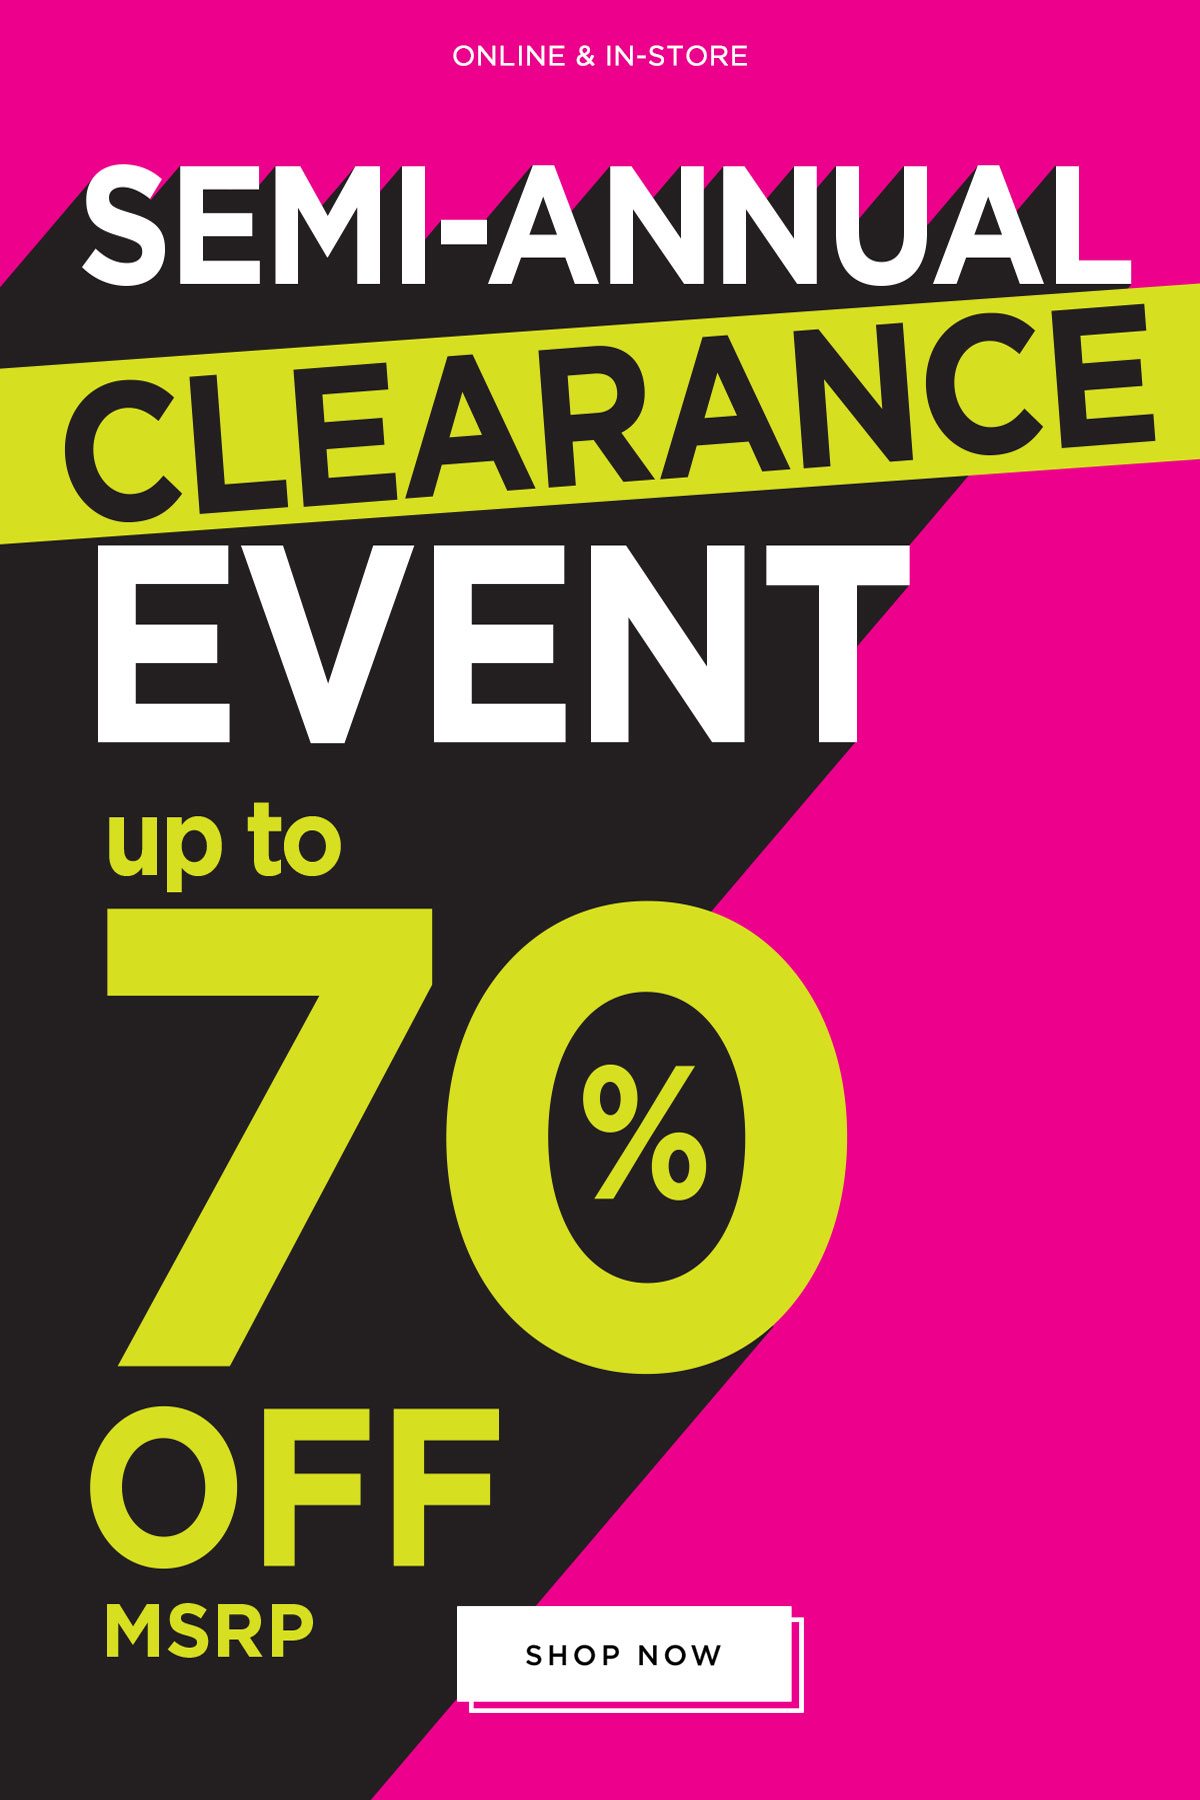 Semi-Annual Clearance Event - Up to 70% off MSRP - Shop Now 